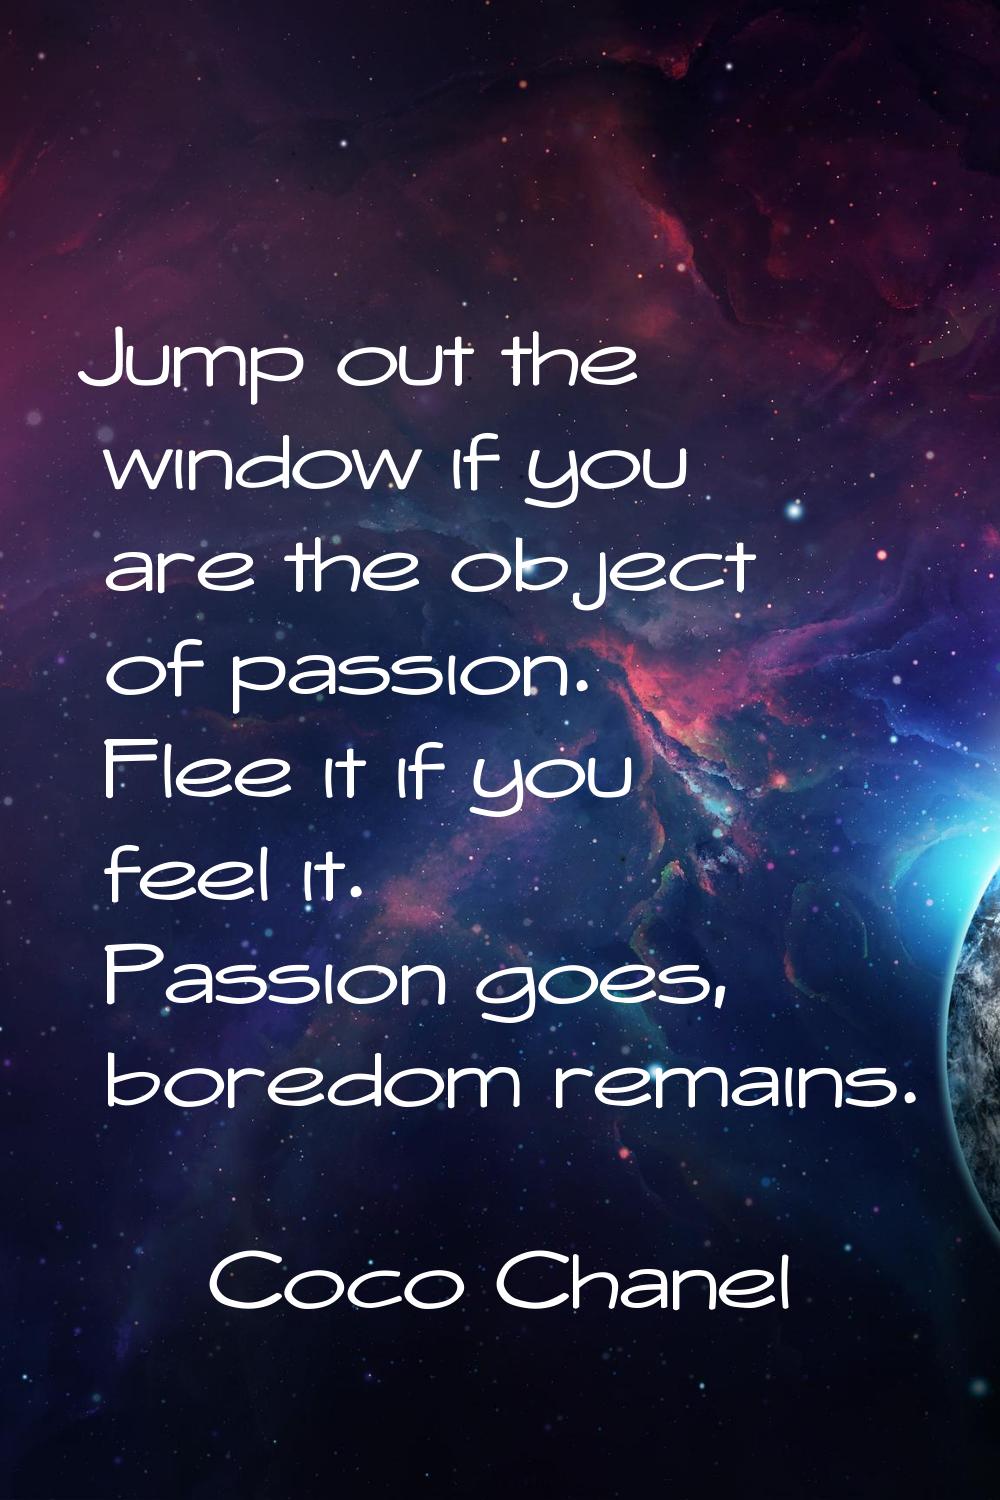 Jump out the window if you are the object of passion. Flee it if you feel it. Passion goes, boredom